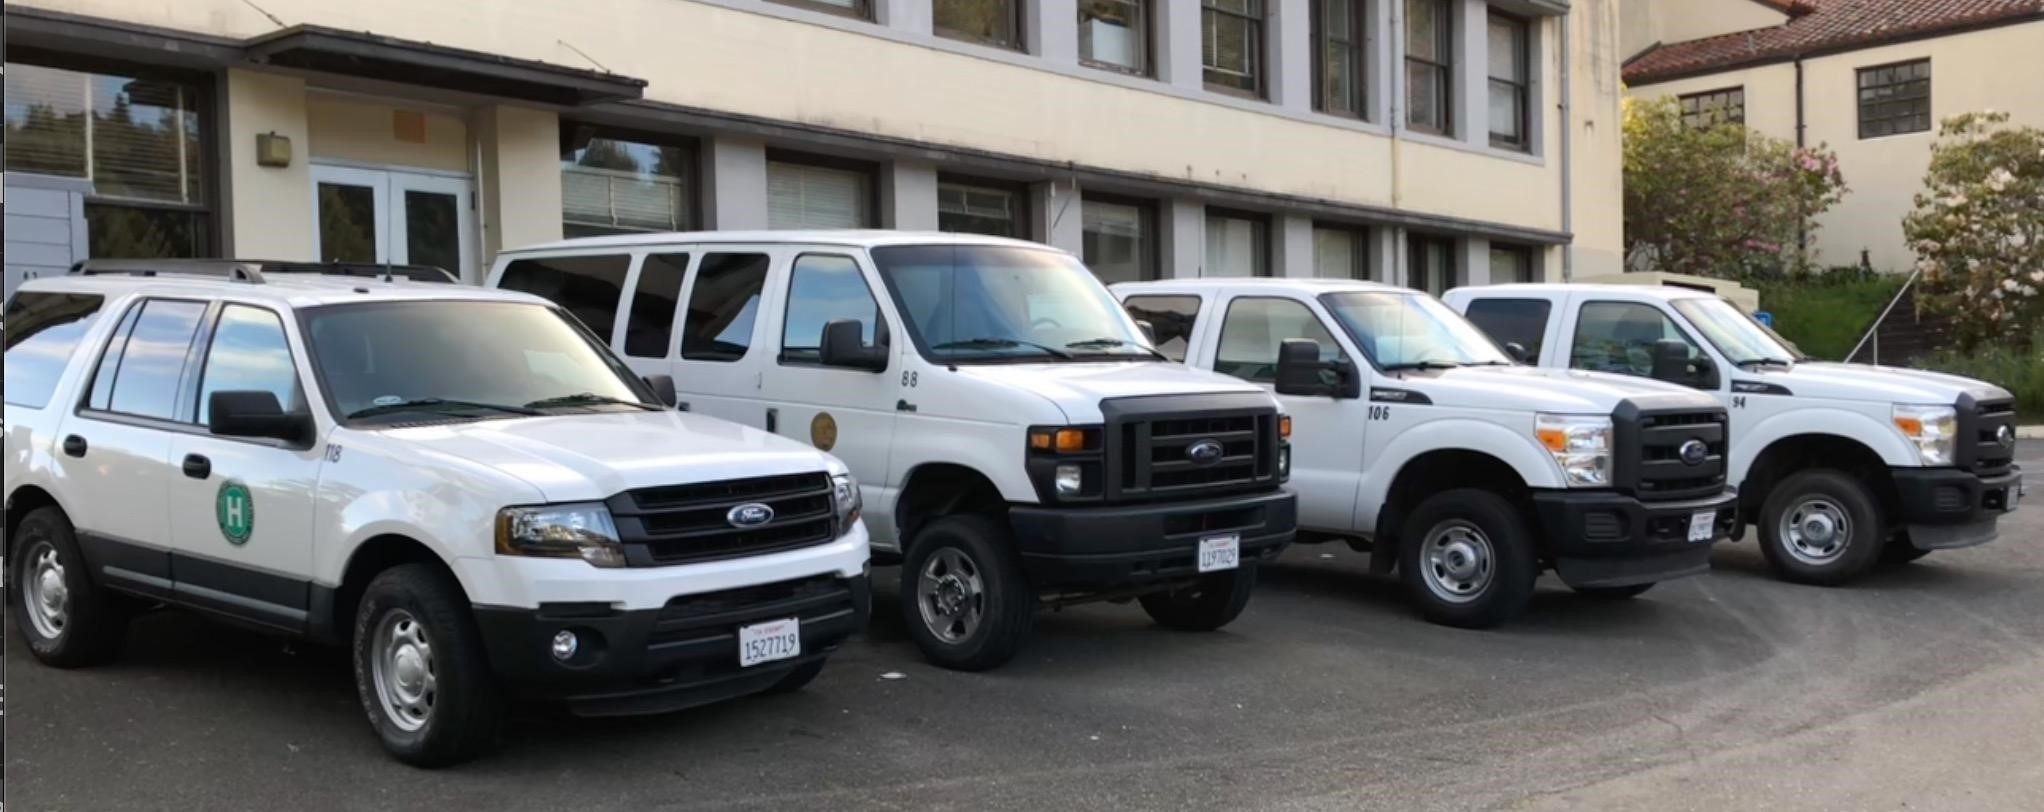 Fleet of vehicles used for the Geology department at Cal Poly Humboldt